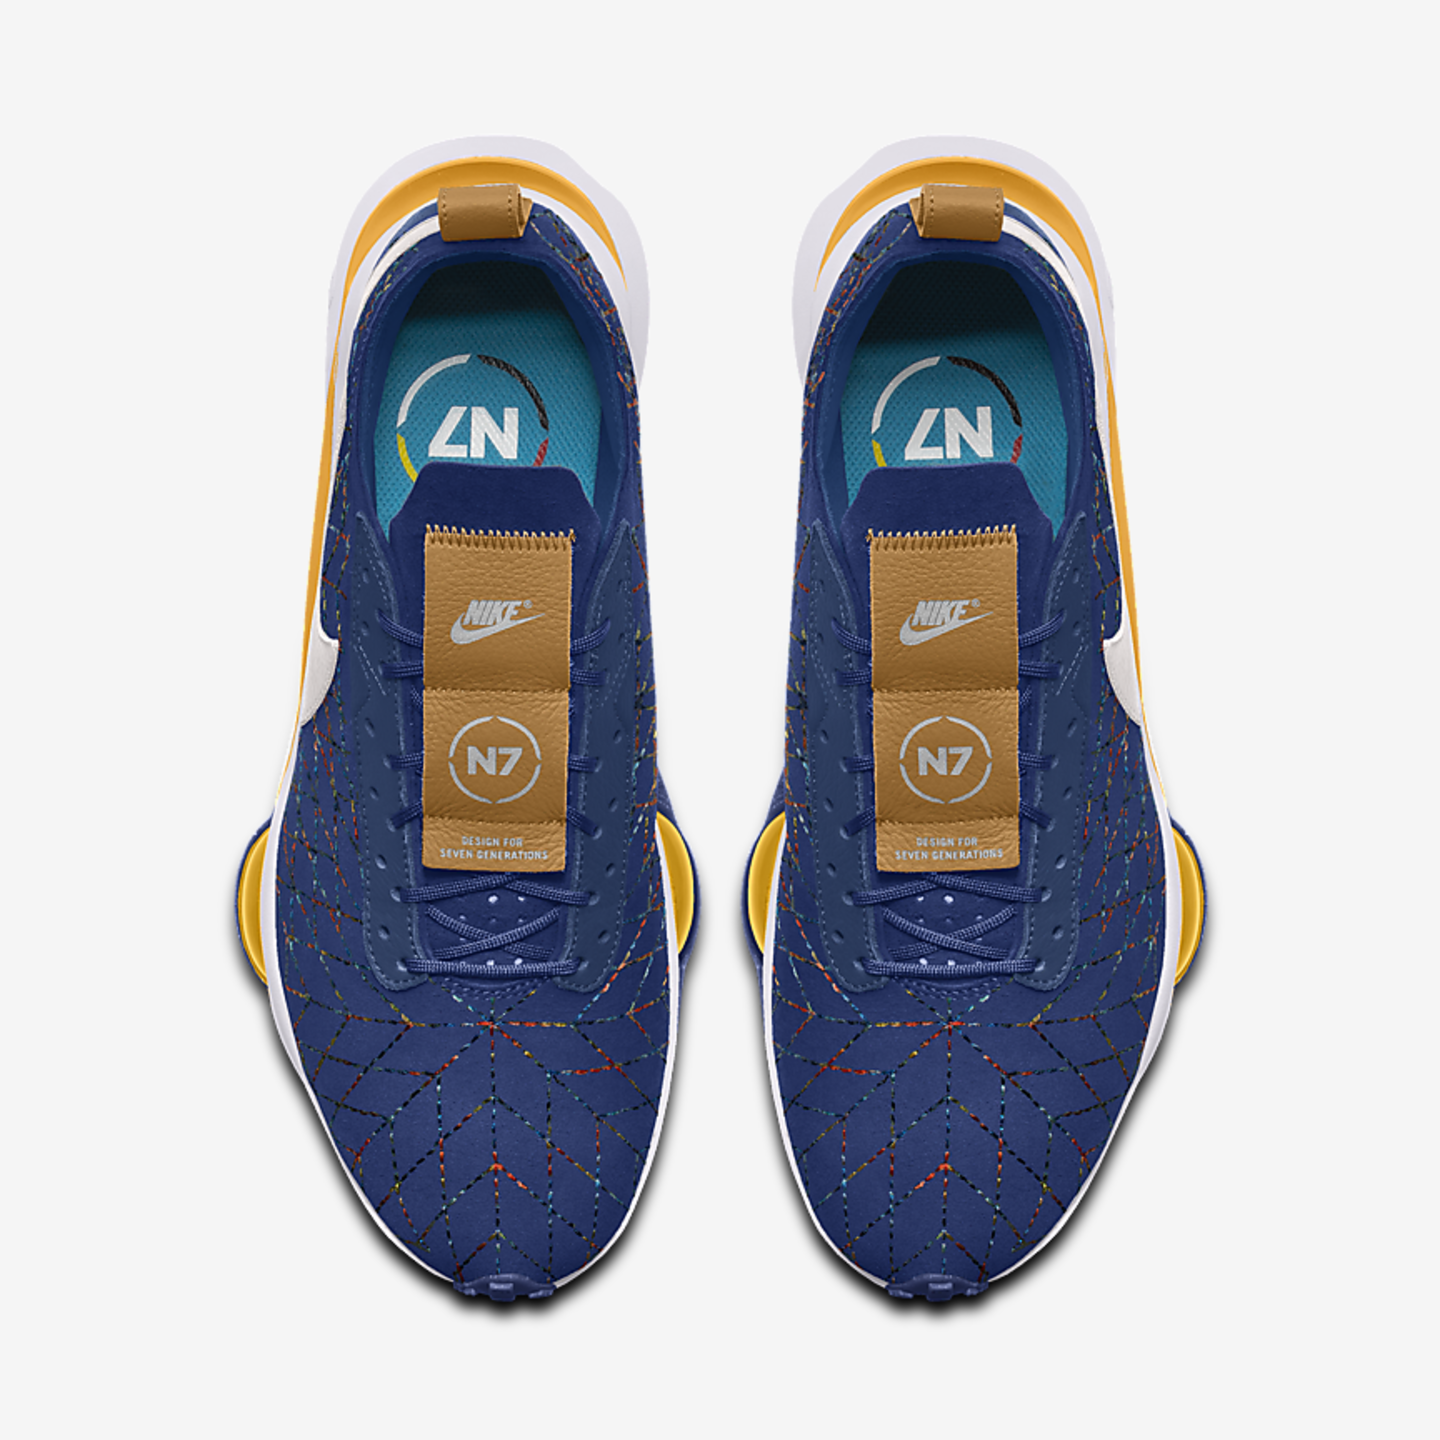 Autres image de Nike Air Zoom-Type N7 by Kyrie Irving